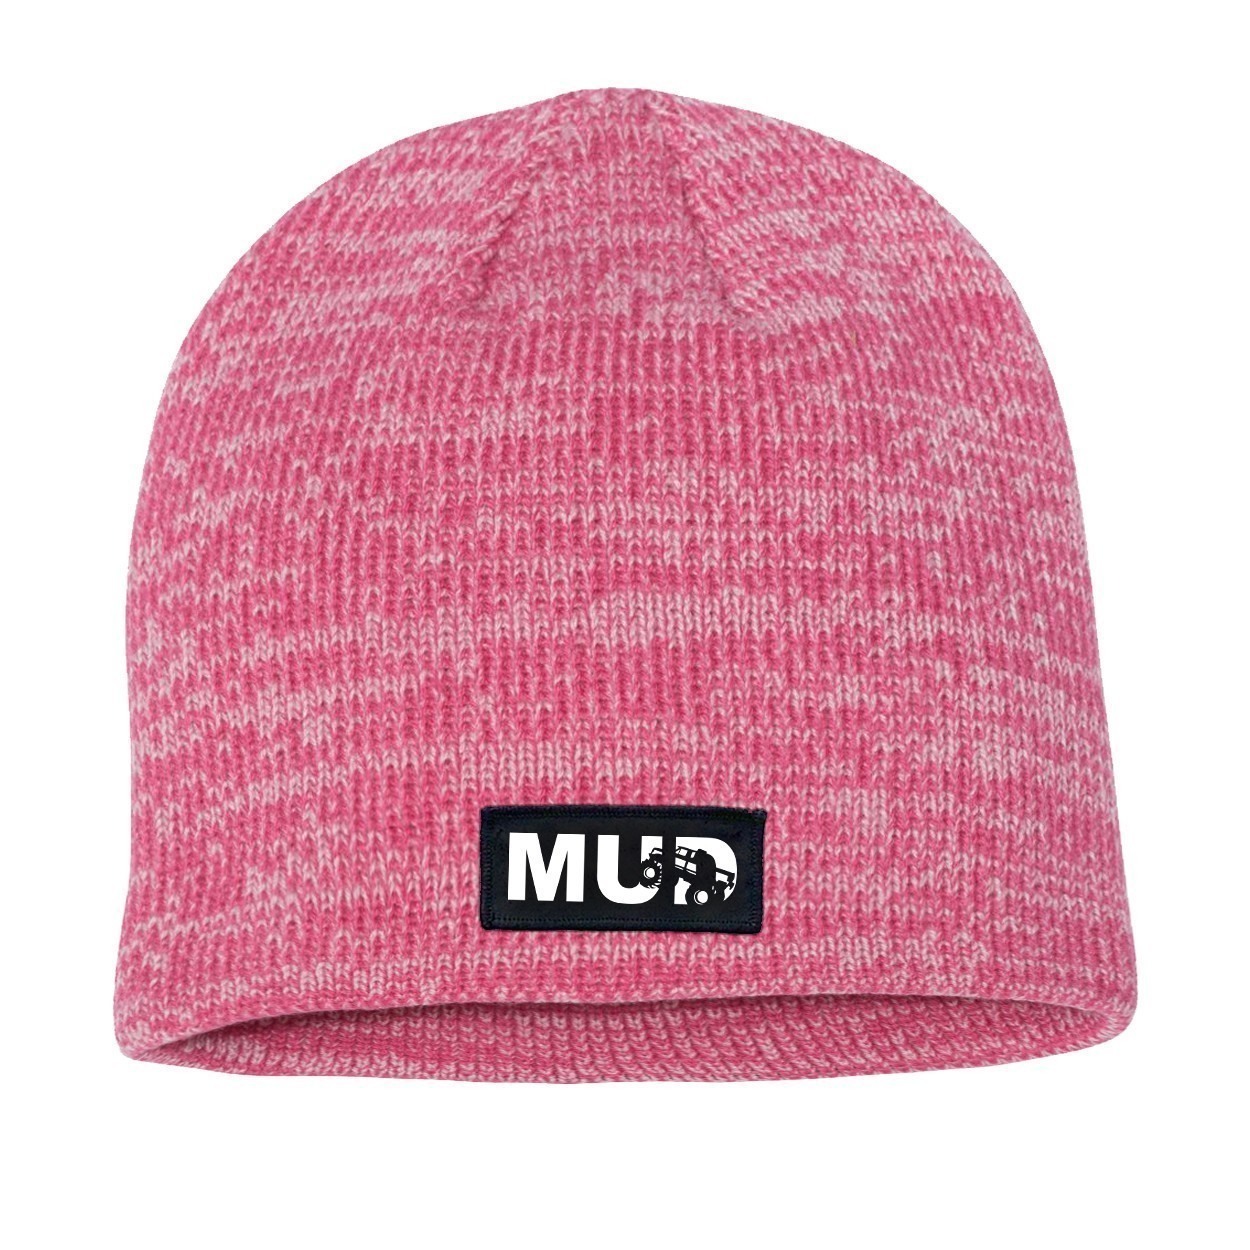 Mud Truck Logo Night Out Woven Patch Skully Marled Knit Beanie Pink/Dark Pink (White Logo)